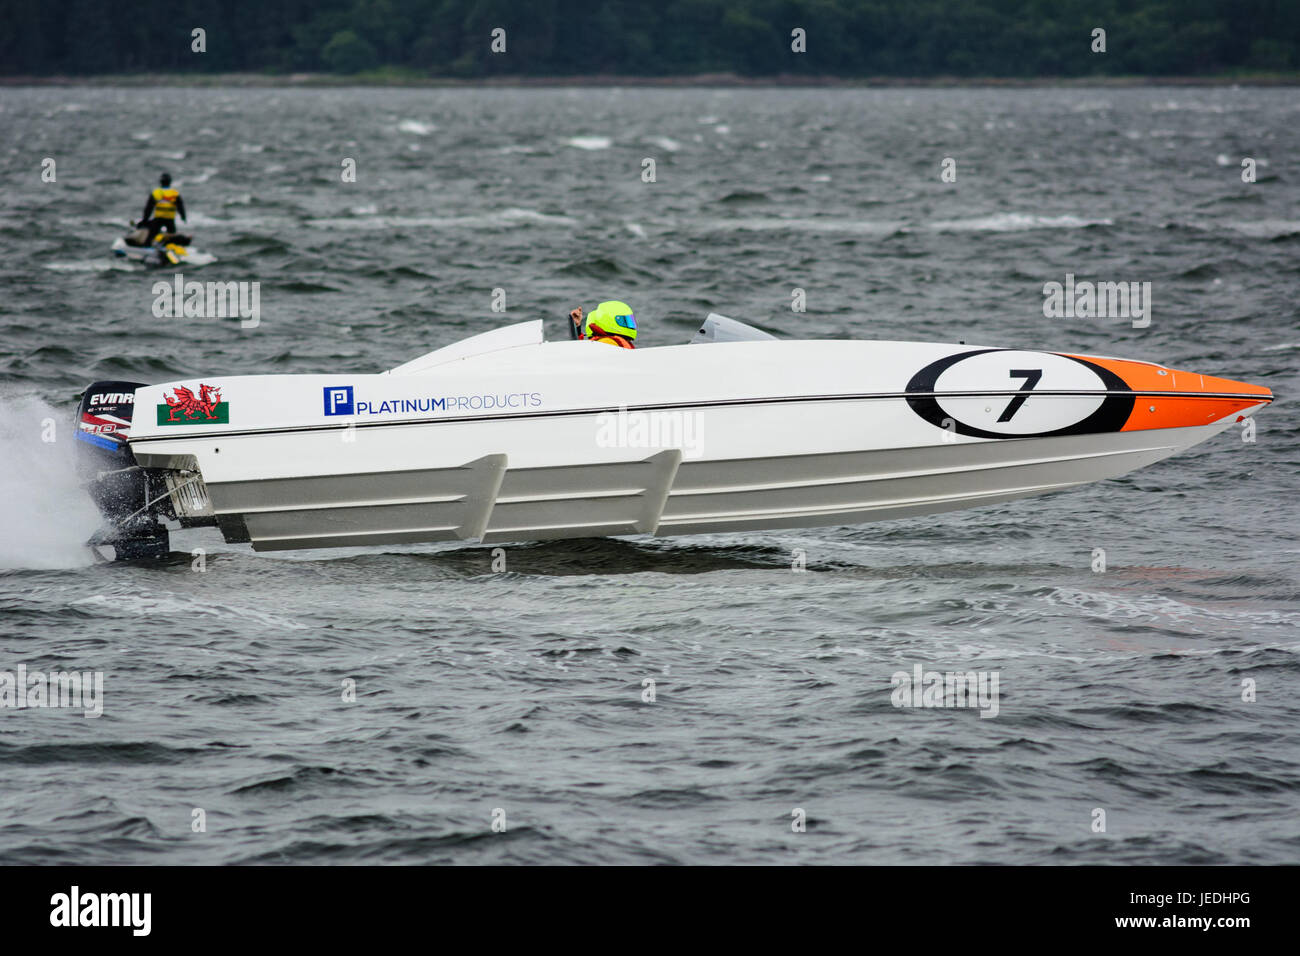 P1 Superstock Powerboat Racing from the Esplanade, Greenock, Scotland, 24 June 2017.  Boat 07, Platinum Products, driven by James Norvill and navigated by Charlie Parsons-Young. Stock Photo